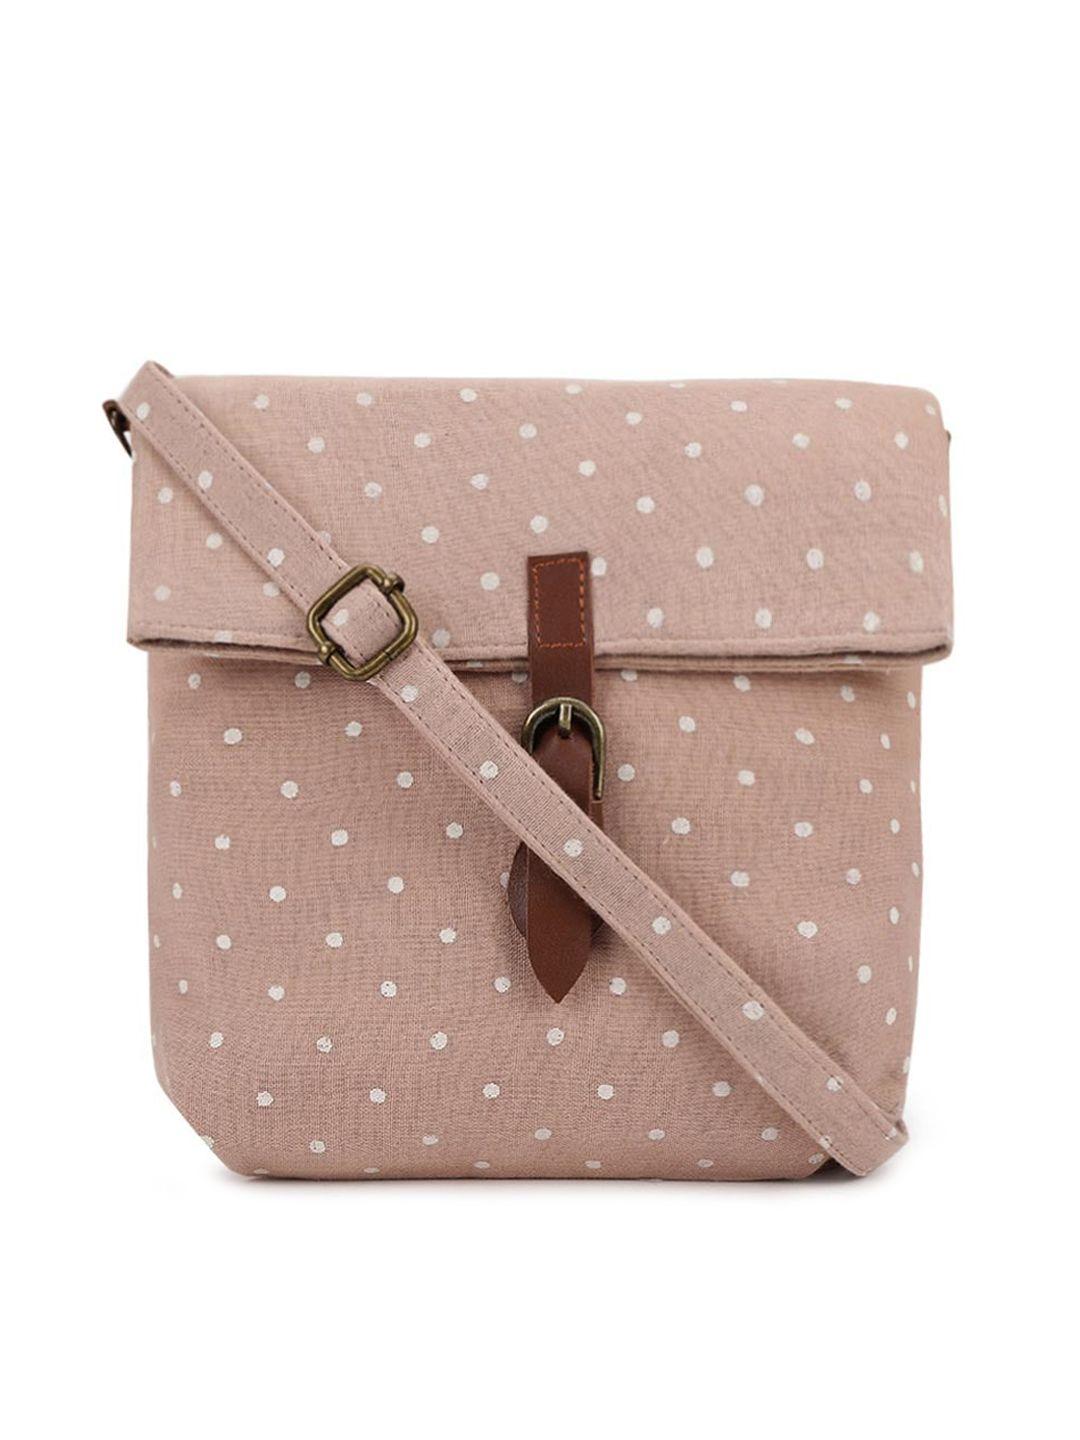 fabindia-polka-dot-structured-quilted-sling-bag